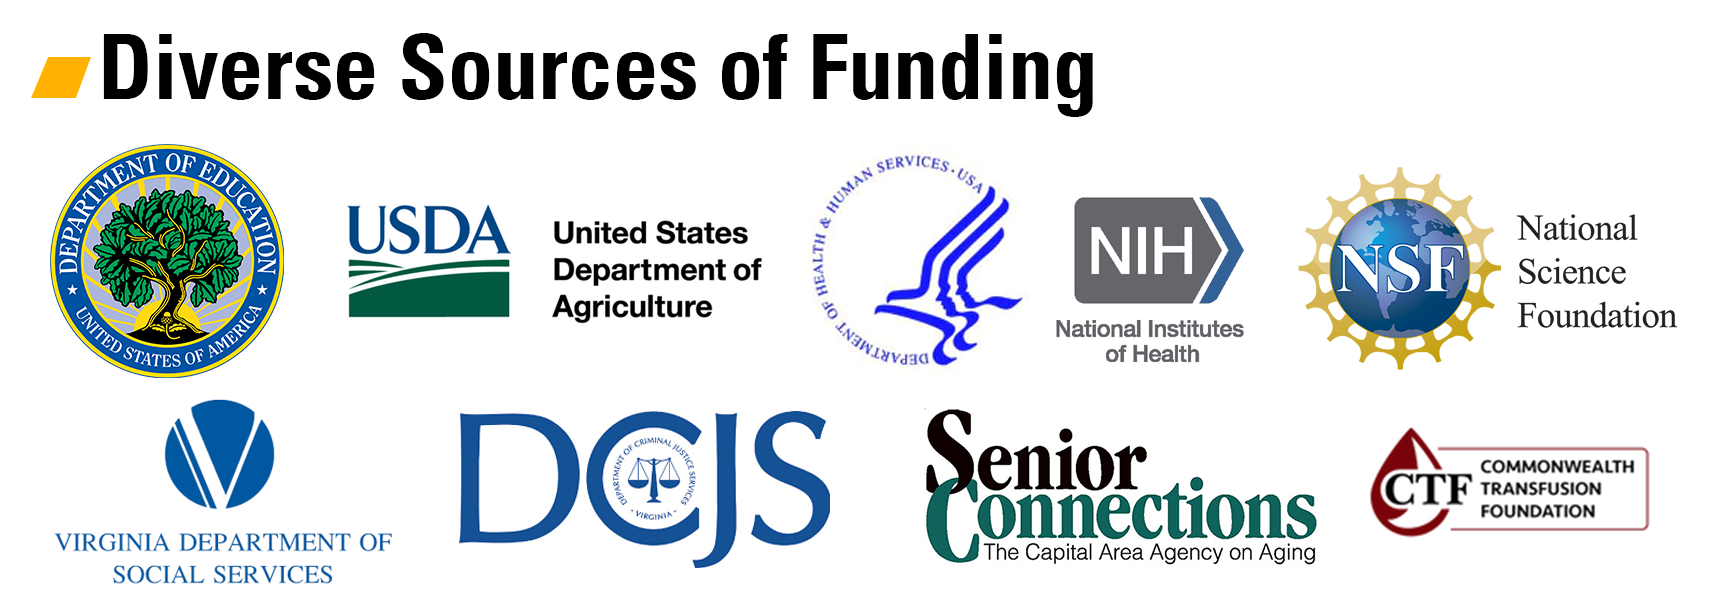 Diverse Sources of Funding from USDA, US Dept of Ed, Dept of Health and Human Services, NIH, VA Dept of Social Services, DCJS, NSF, Commonwealth Transfusion Foundation and Senior Connections